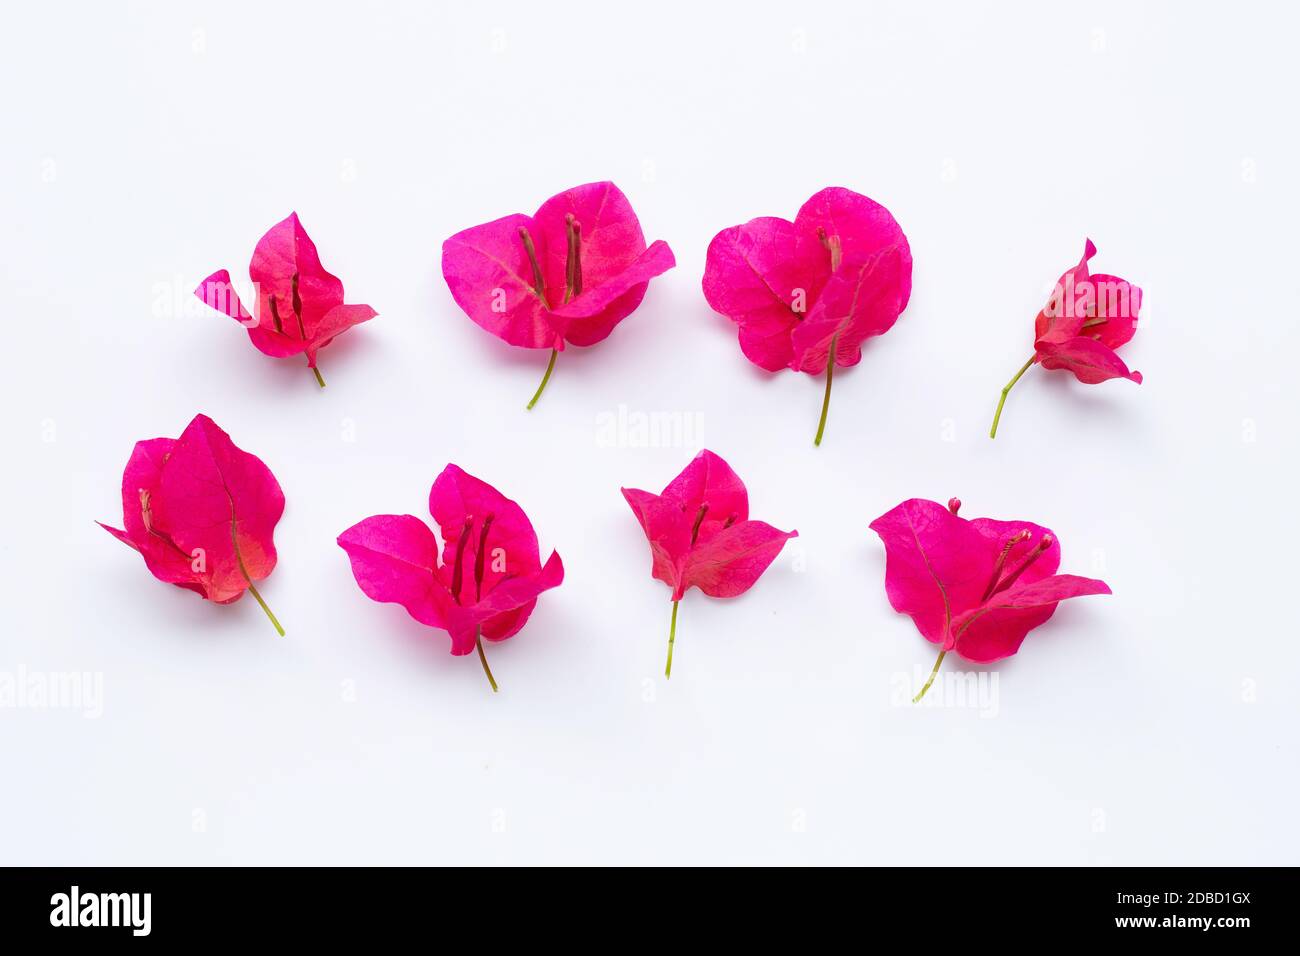 Red bougainvillea flower on white background. Top view Stock Photo